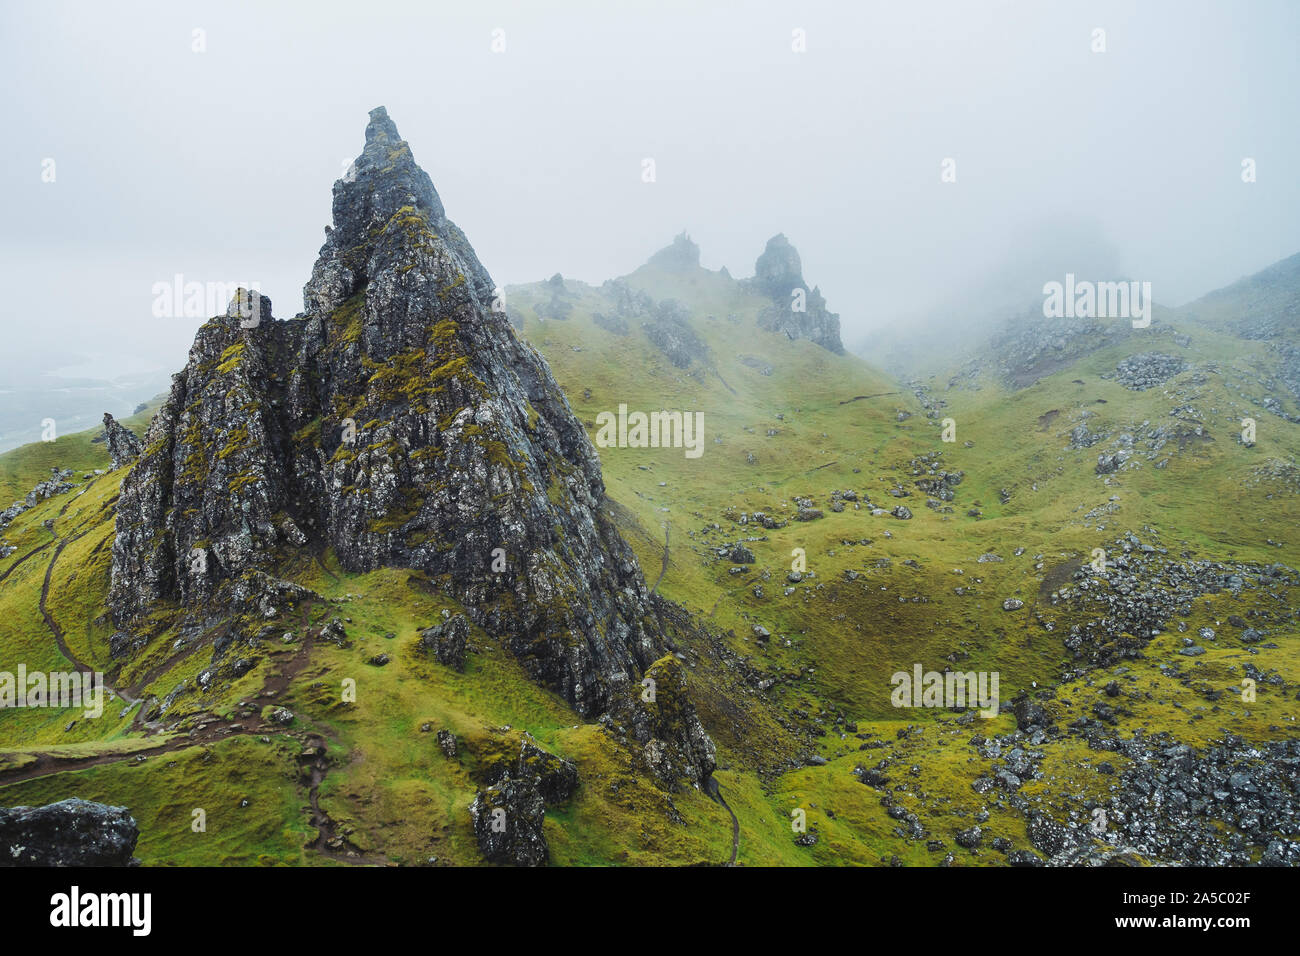 A grey, rainy, cloudy day at the Old Man of Storr, a famous rock formation on the Isle of Skye, Scotland Stock Photo